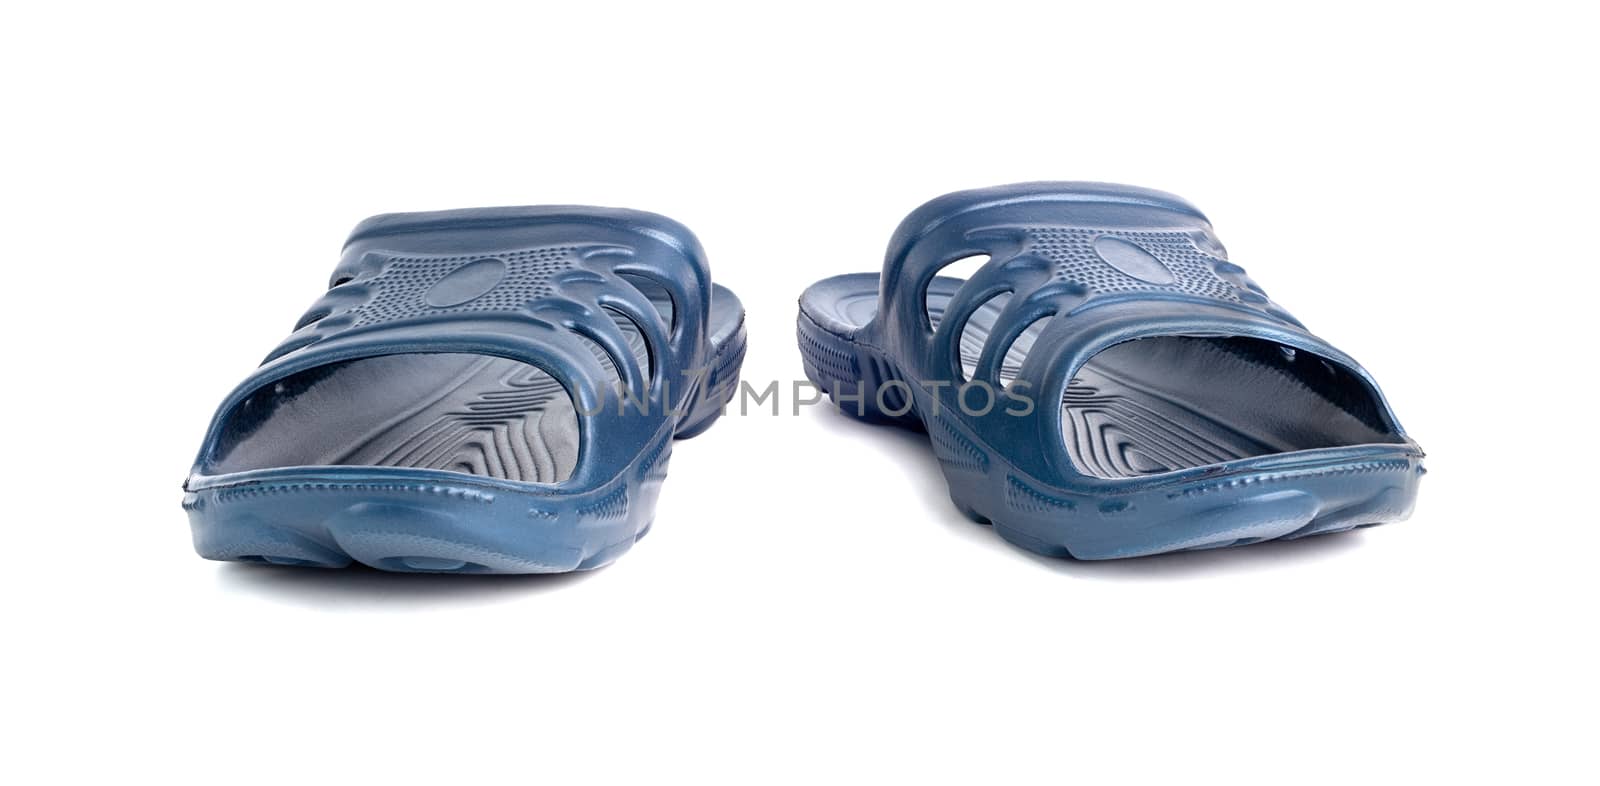 pair of cheap durable blue rubber slippers isolated on white background. by z1b